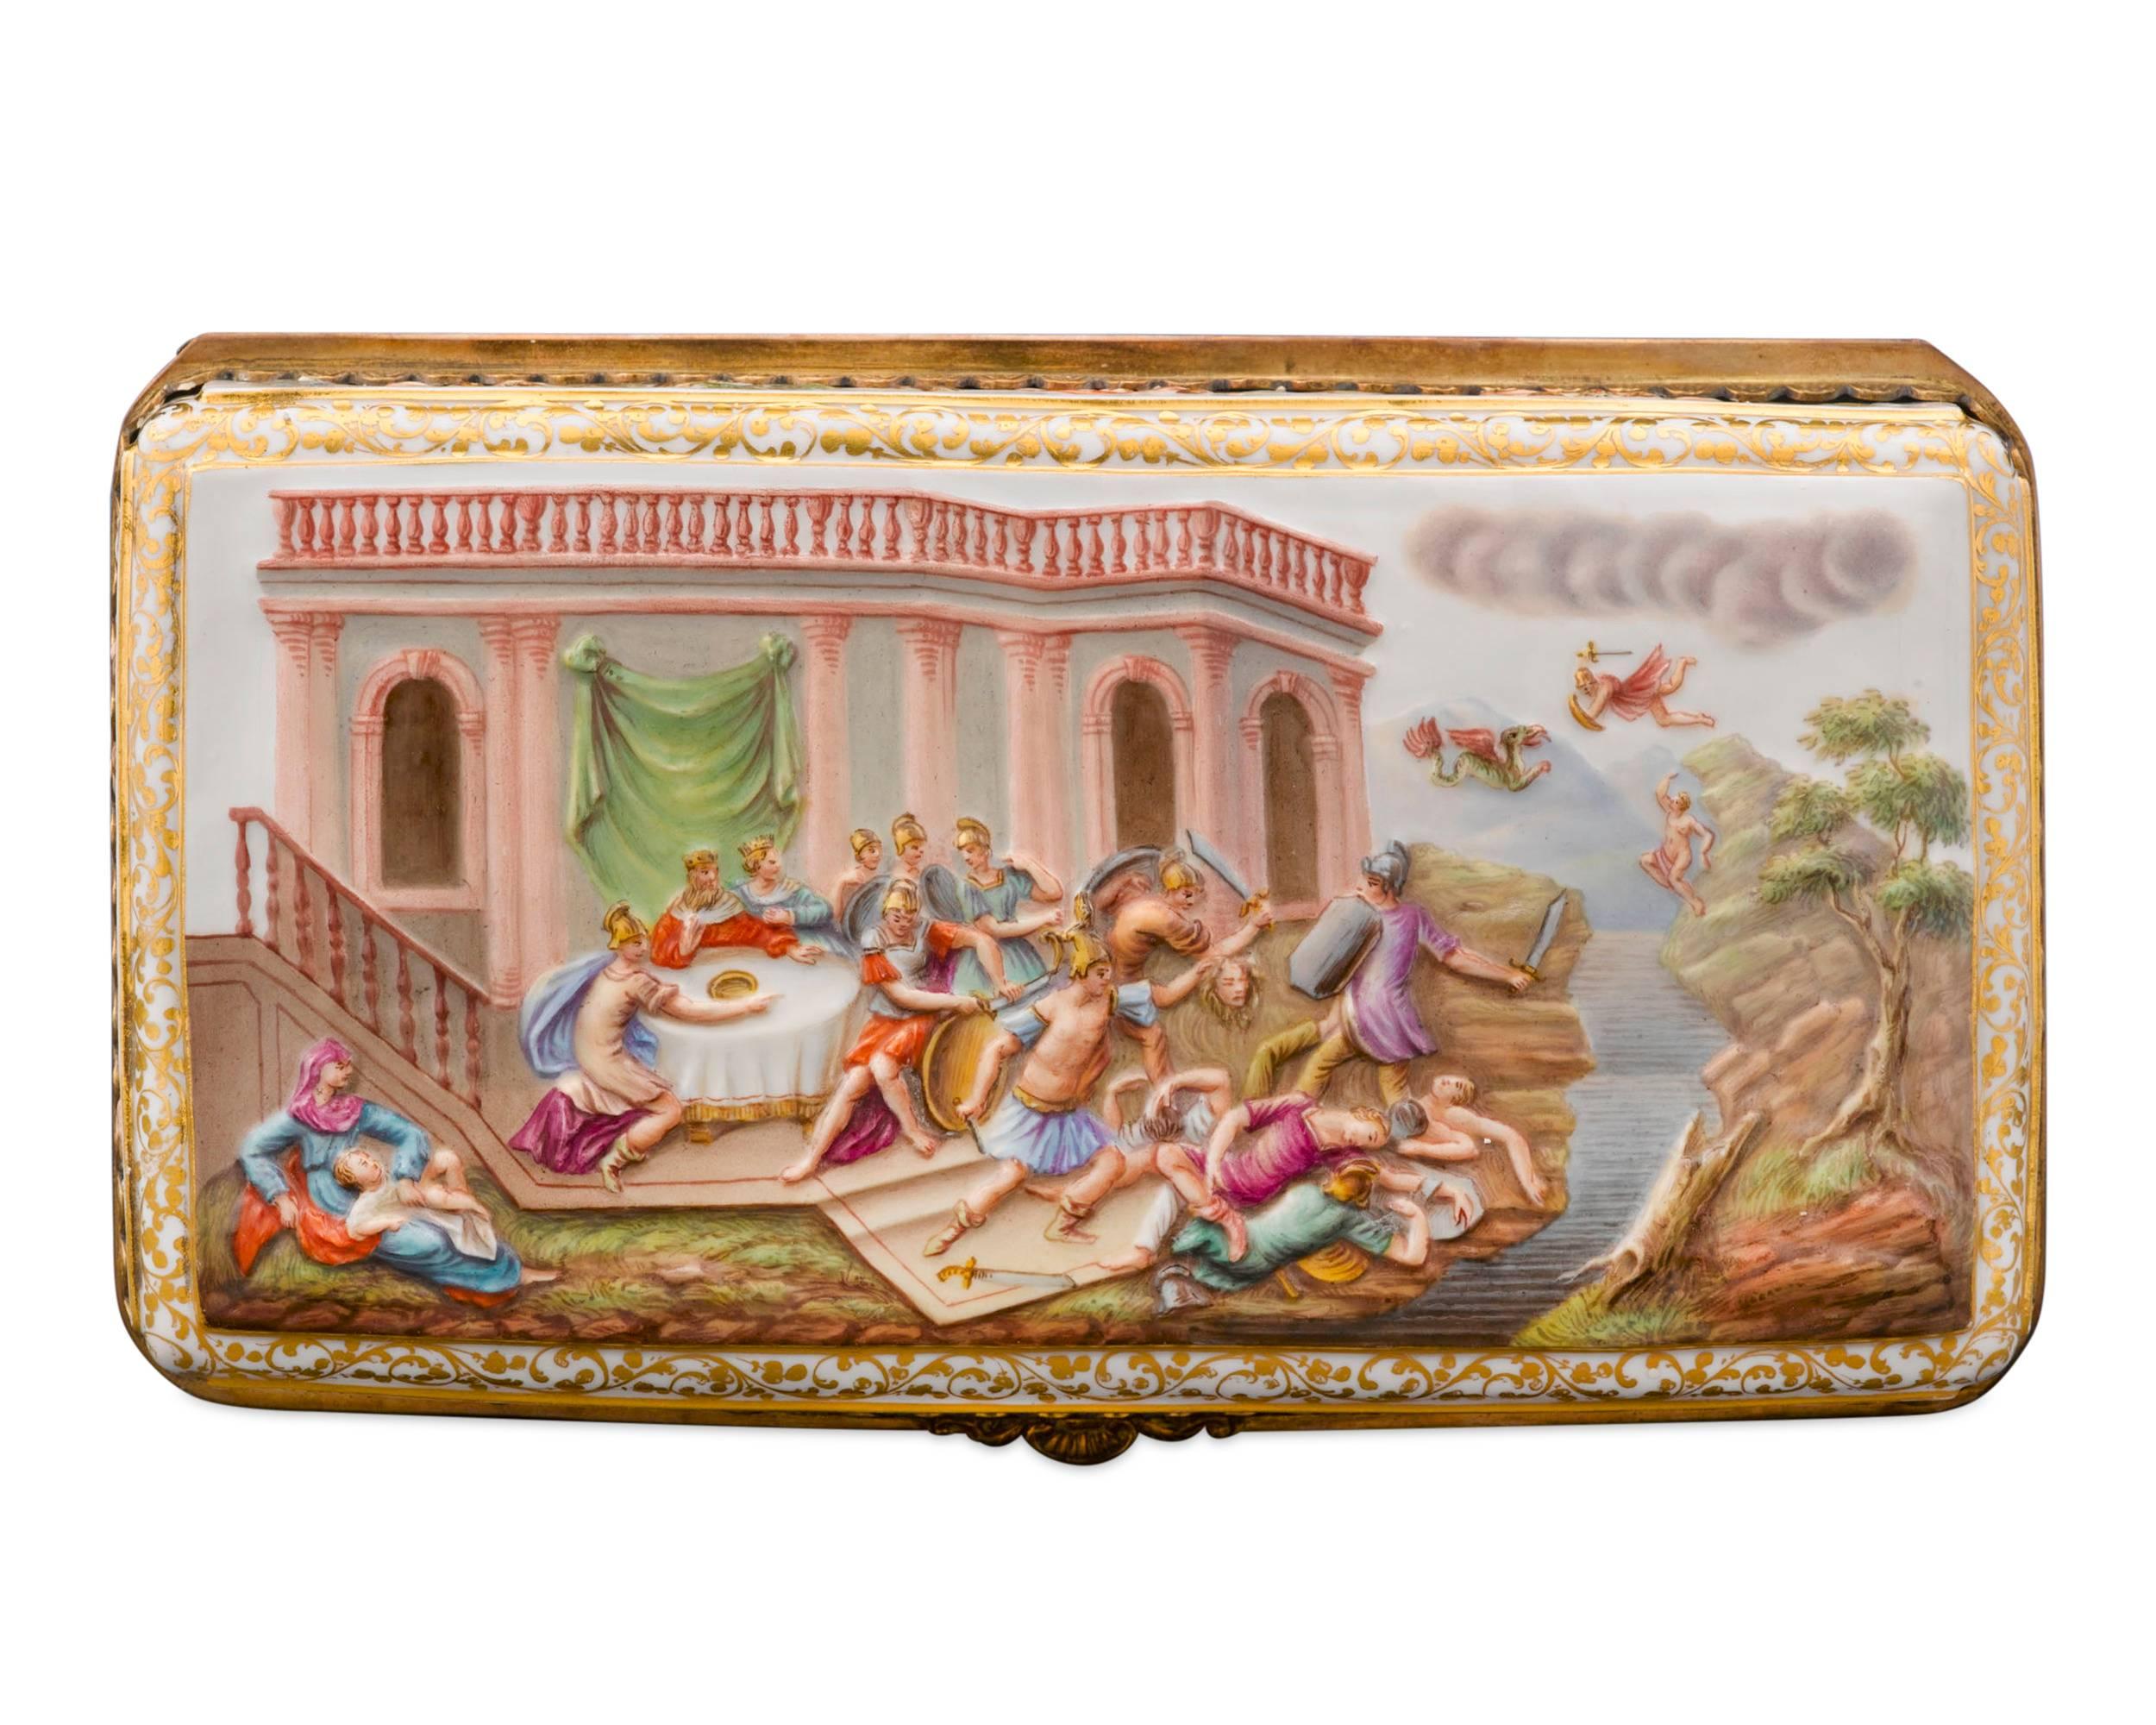 Neoclassical 19th Century Porcelain Box with Fighting Scene by Meissen